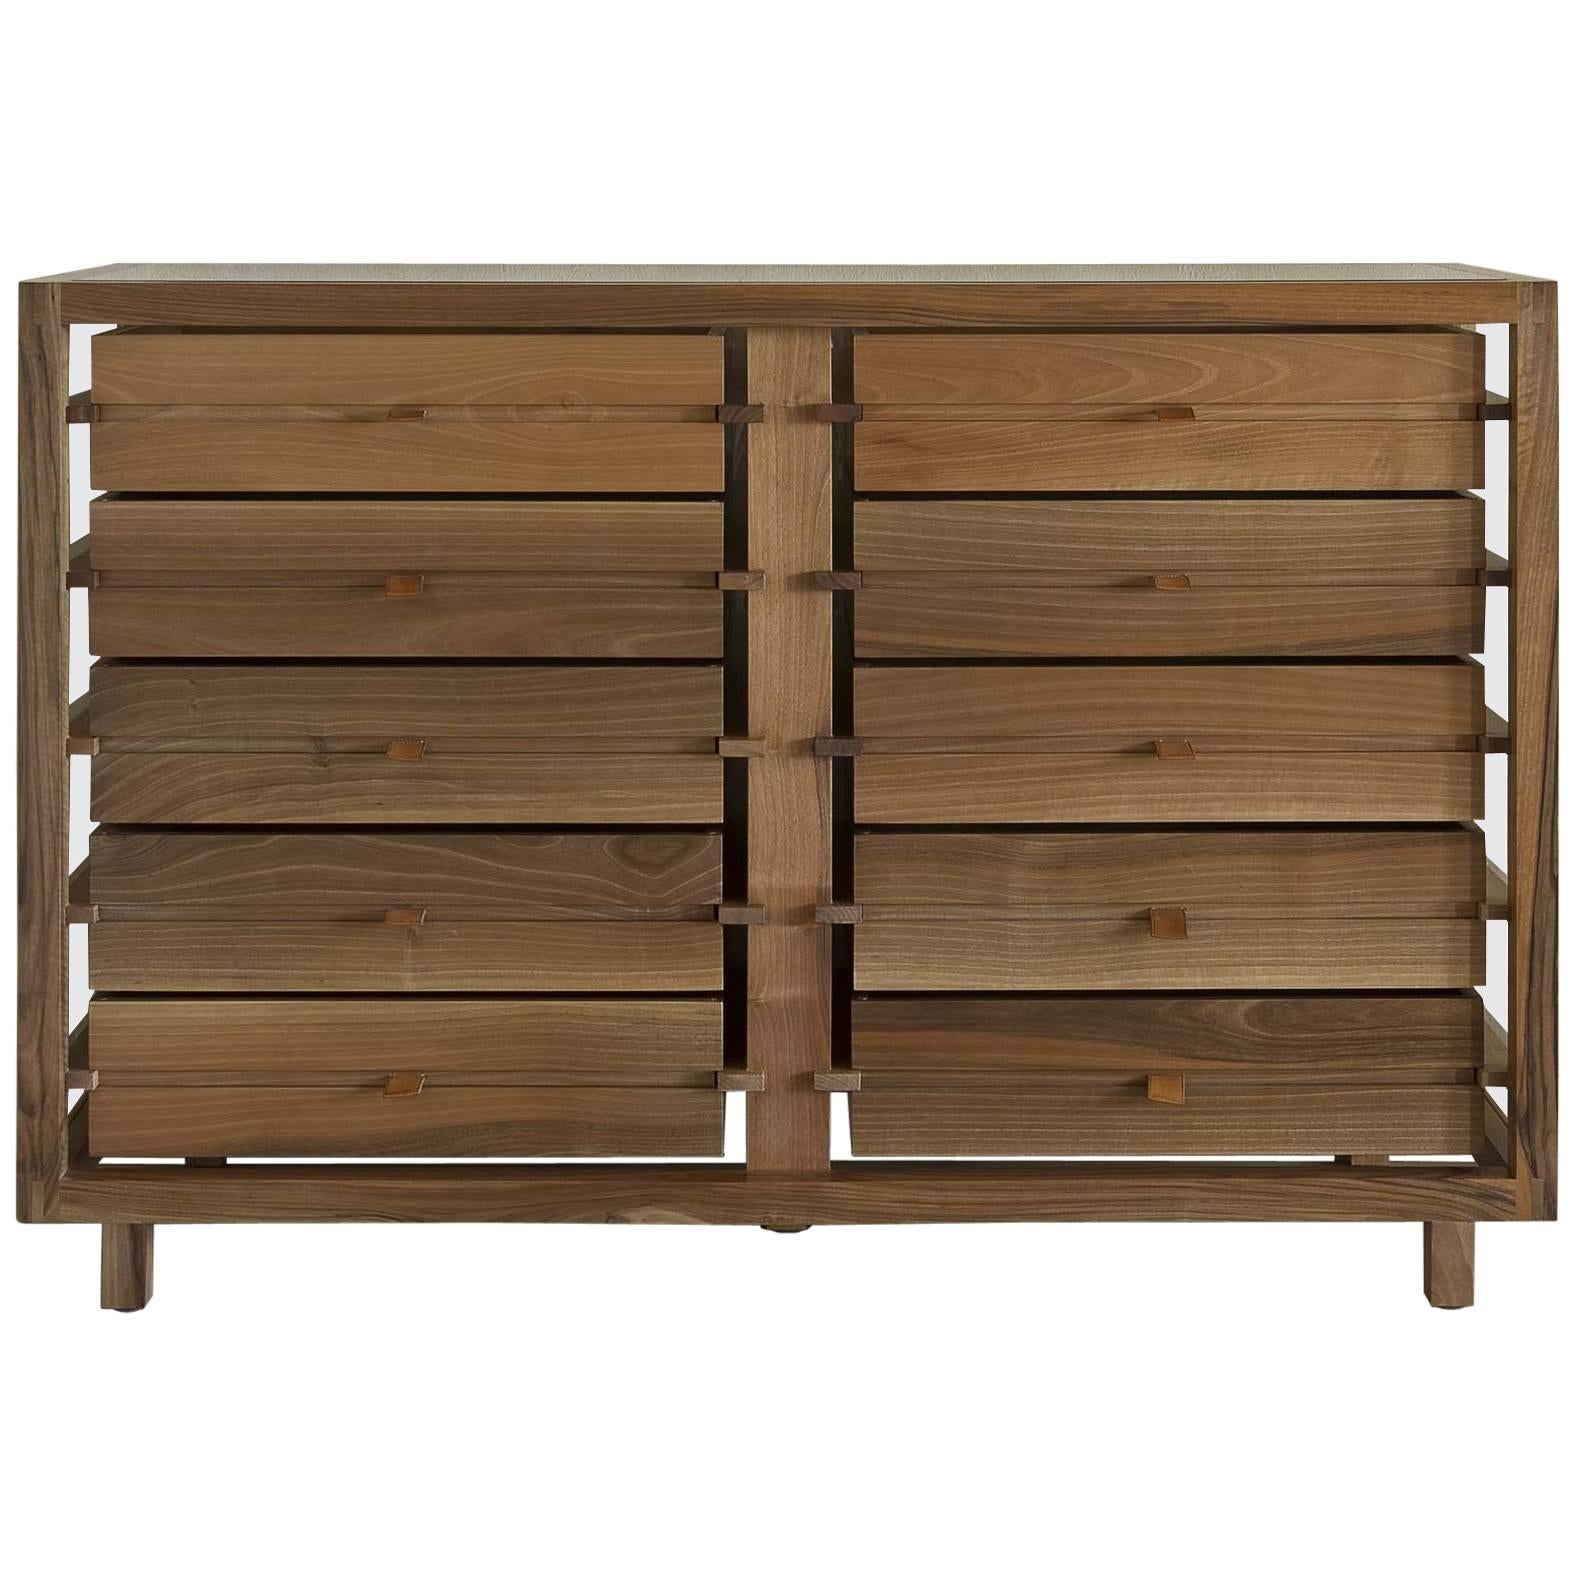 "Optimum" Glass and Walnut Chest of 10 Drawers by Stephane Lebrun for Dessie'